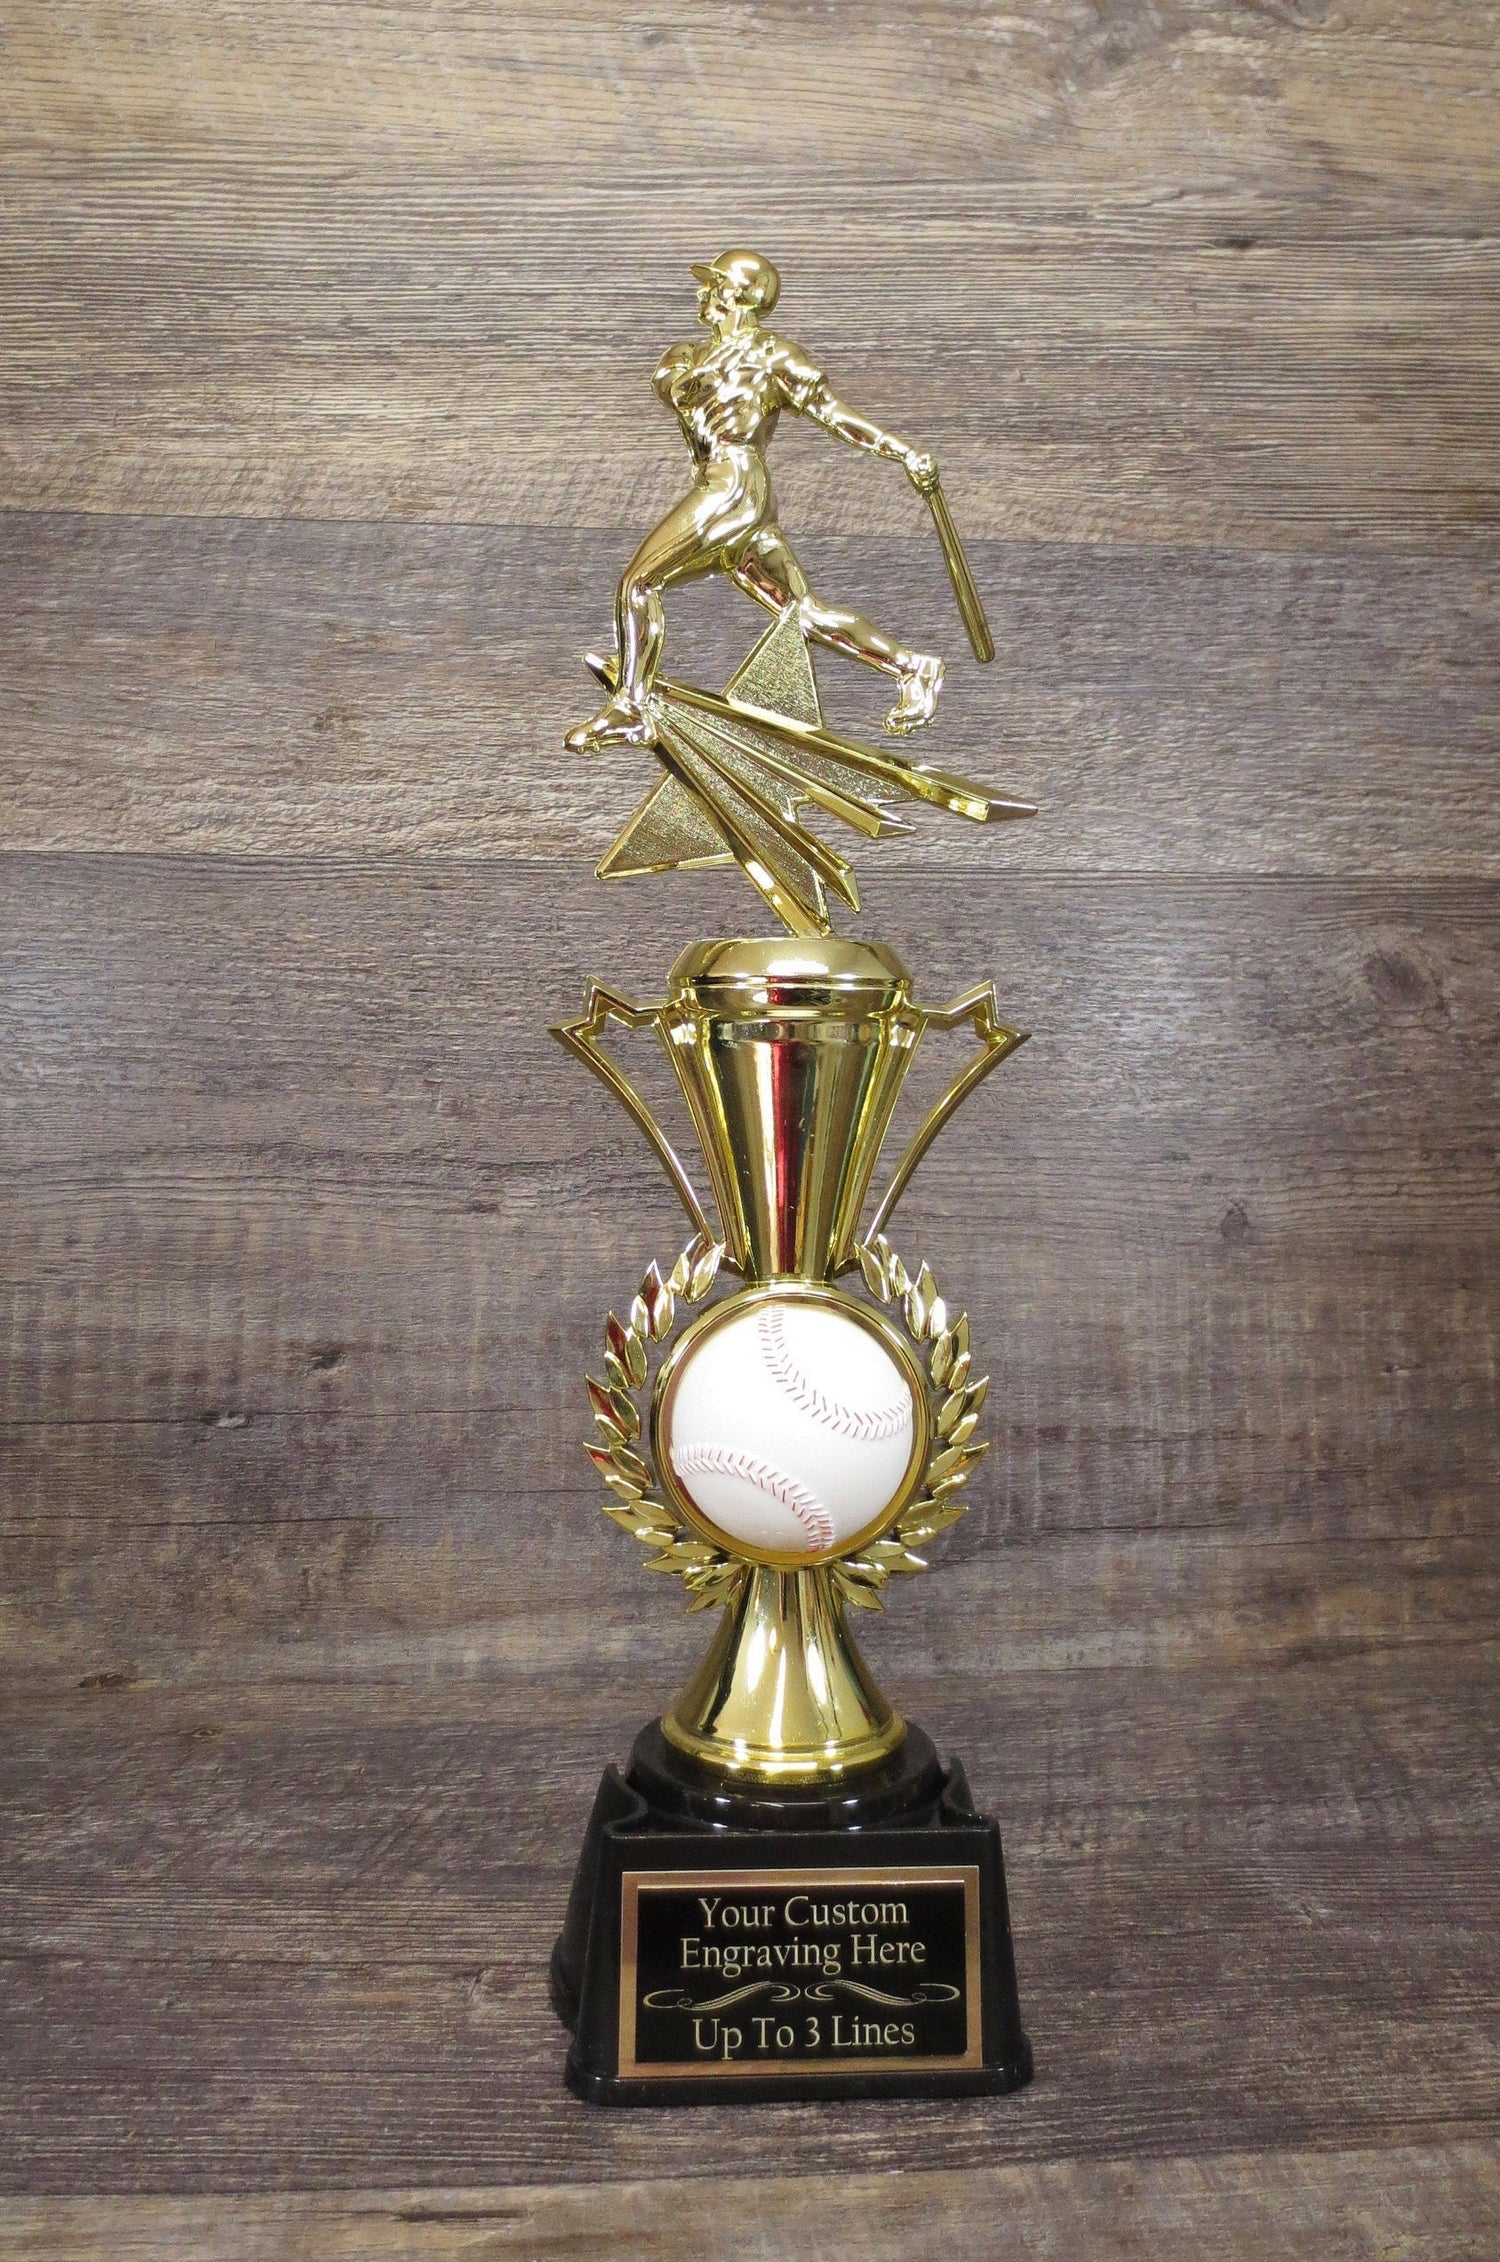 Baseball Trophy Fantasy Baseball Trophies Award Personalized Baseball Team Sports Award Baseball Participation Recognition Championship